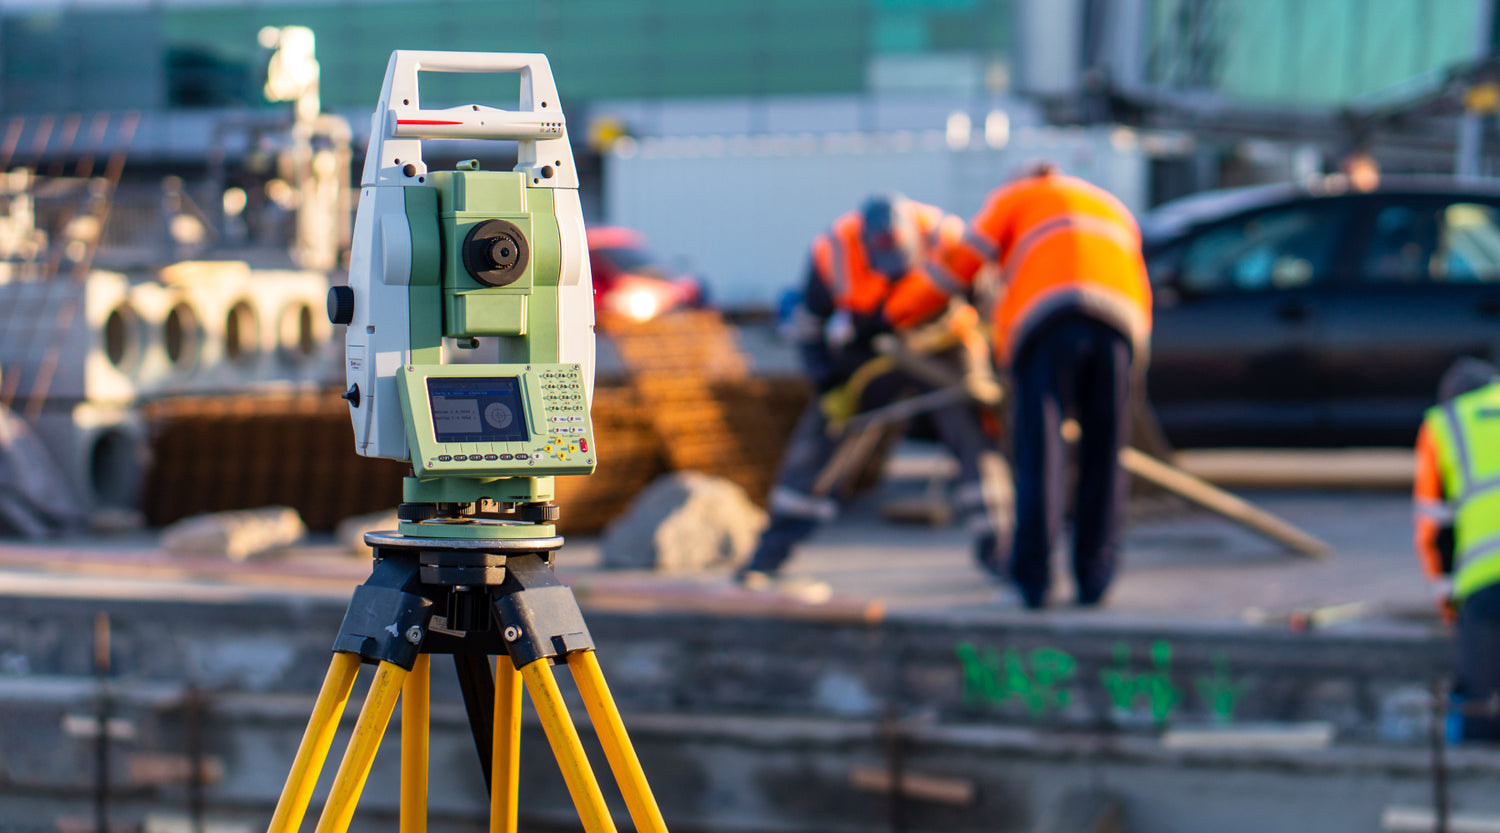 The Leica TRC1201+ total station is positioned on a tripod at the construction site.